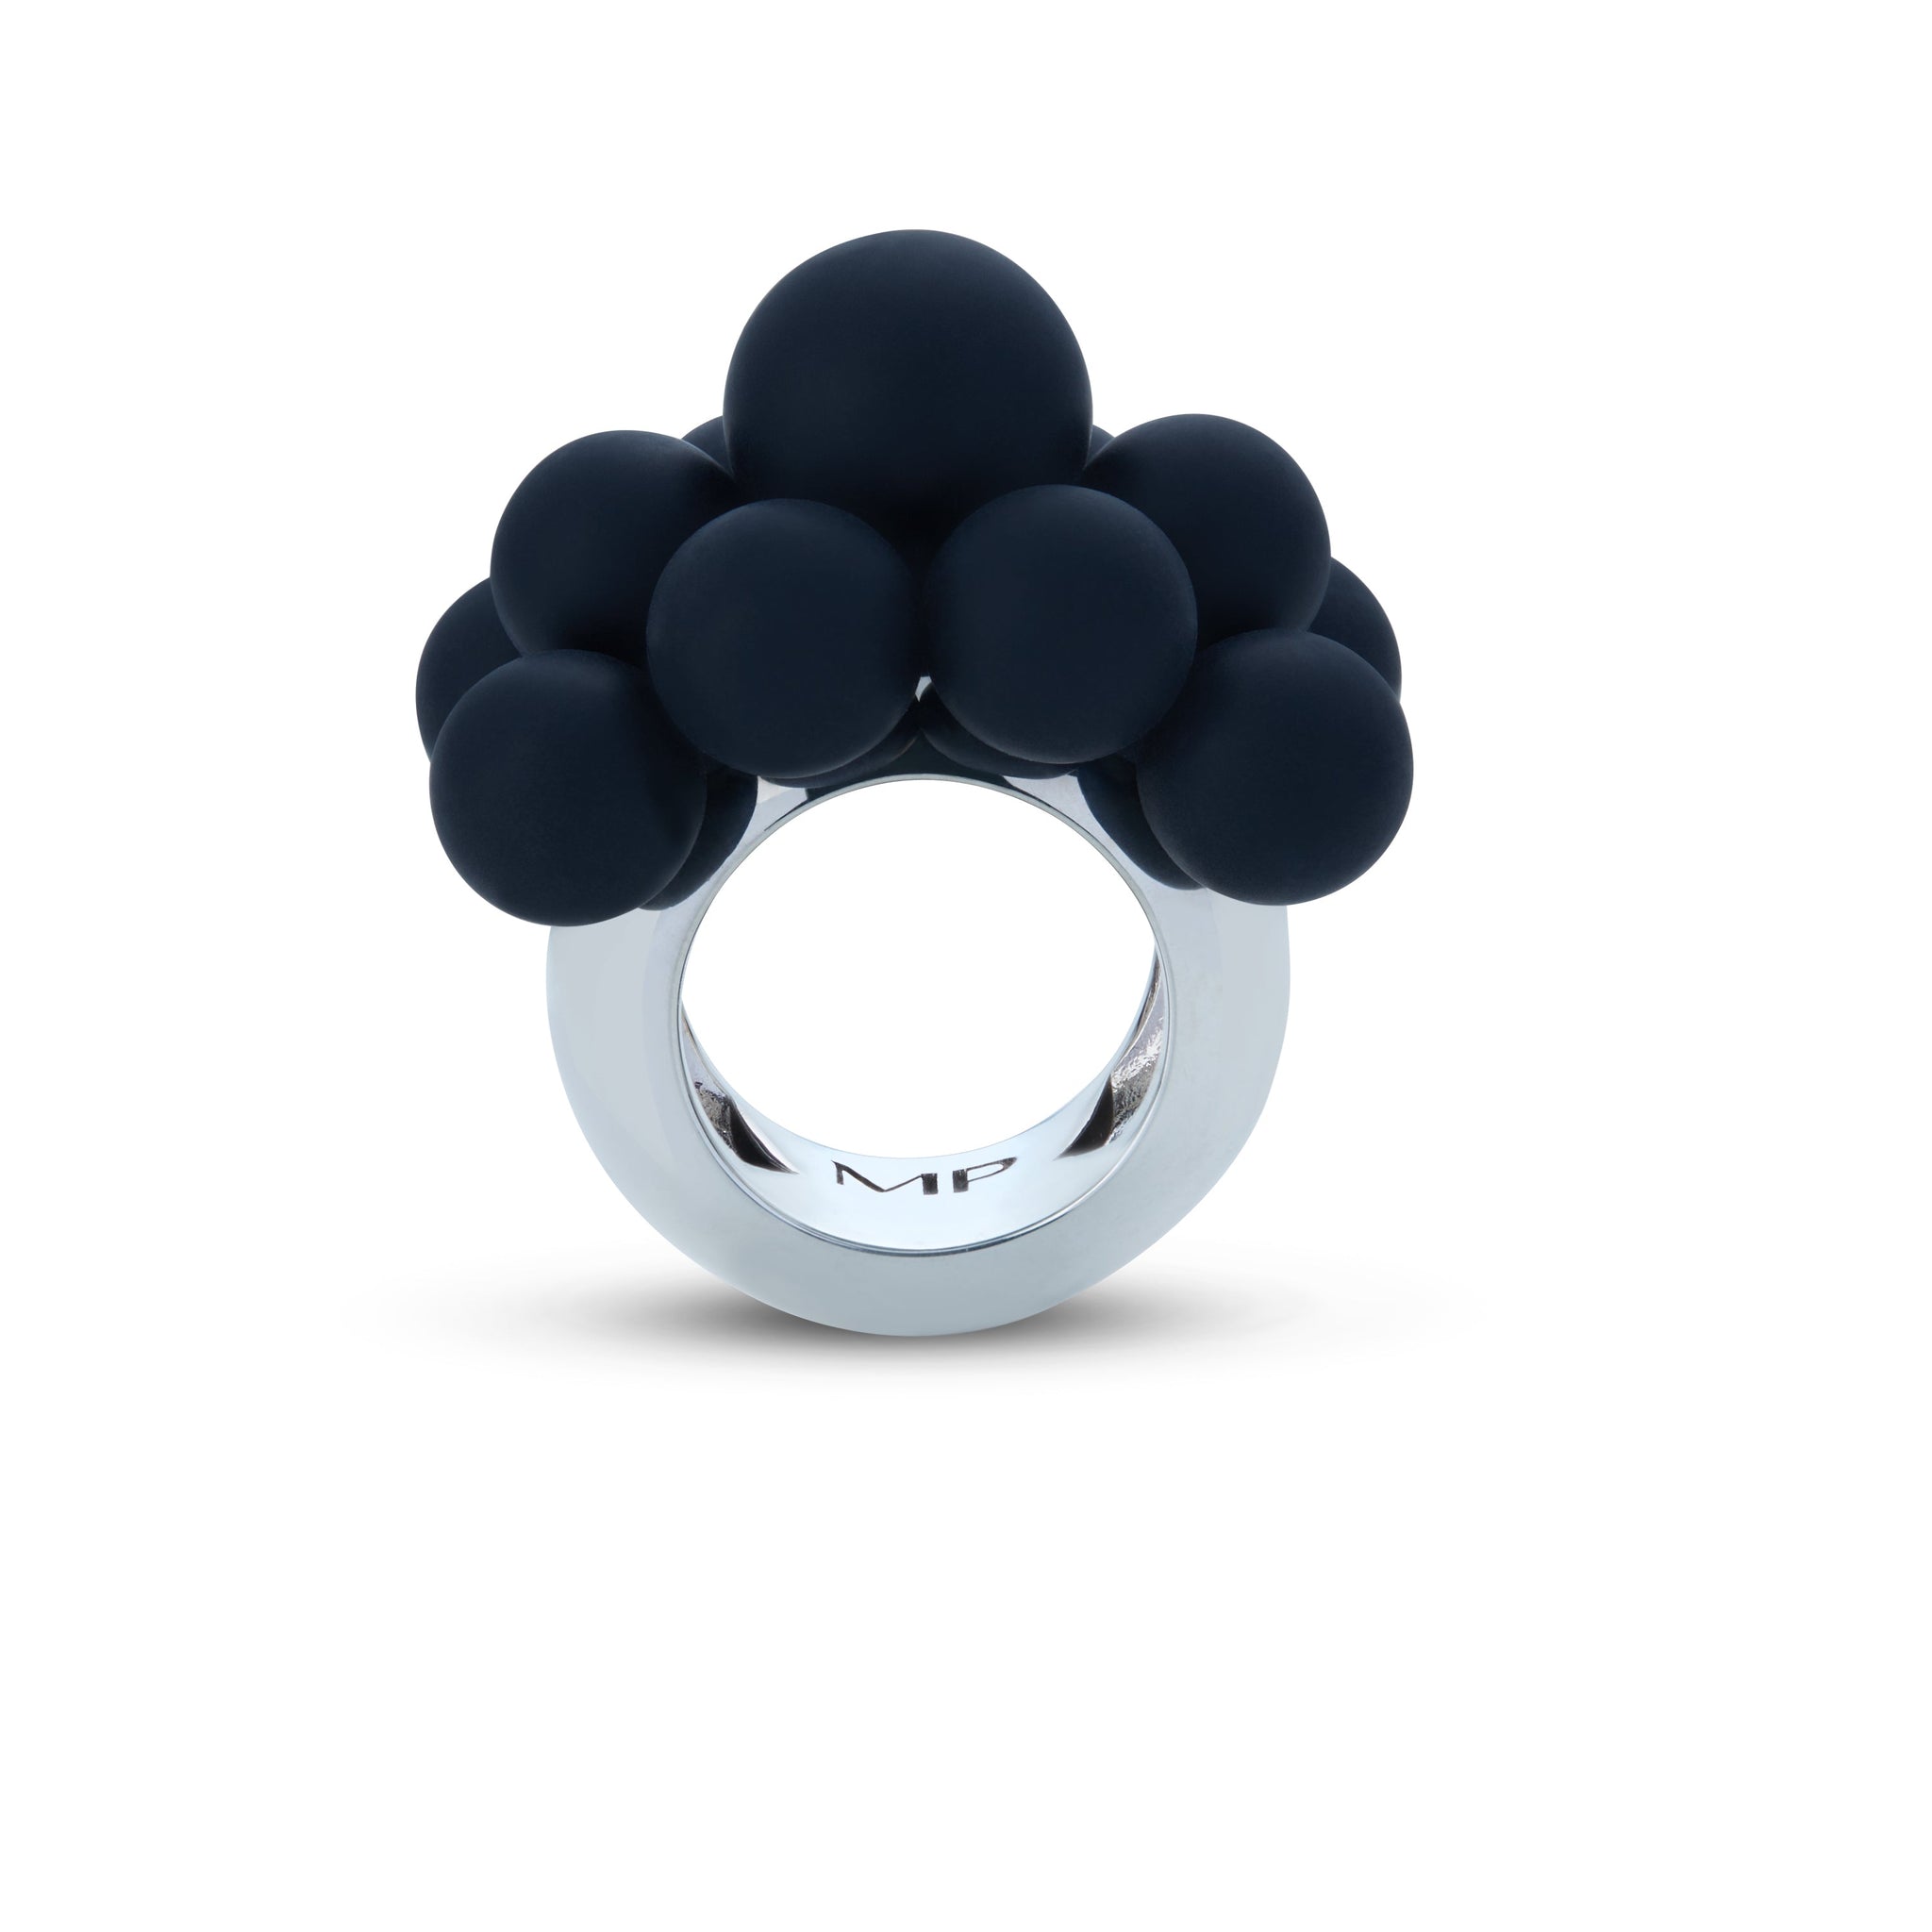 Madame Palm cocktail ring self-love in black silicone pearls and white gold 18kt band